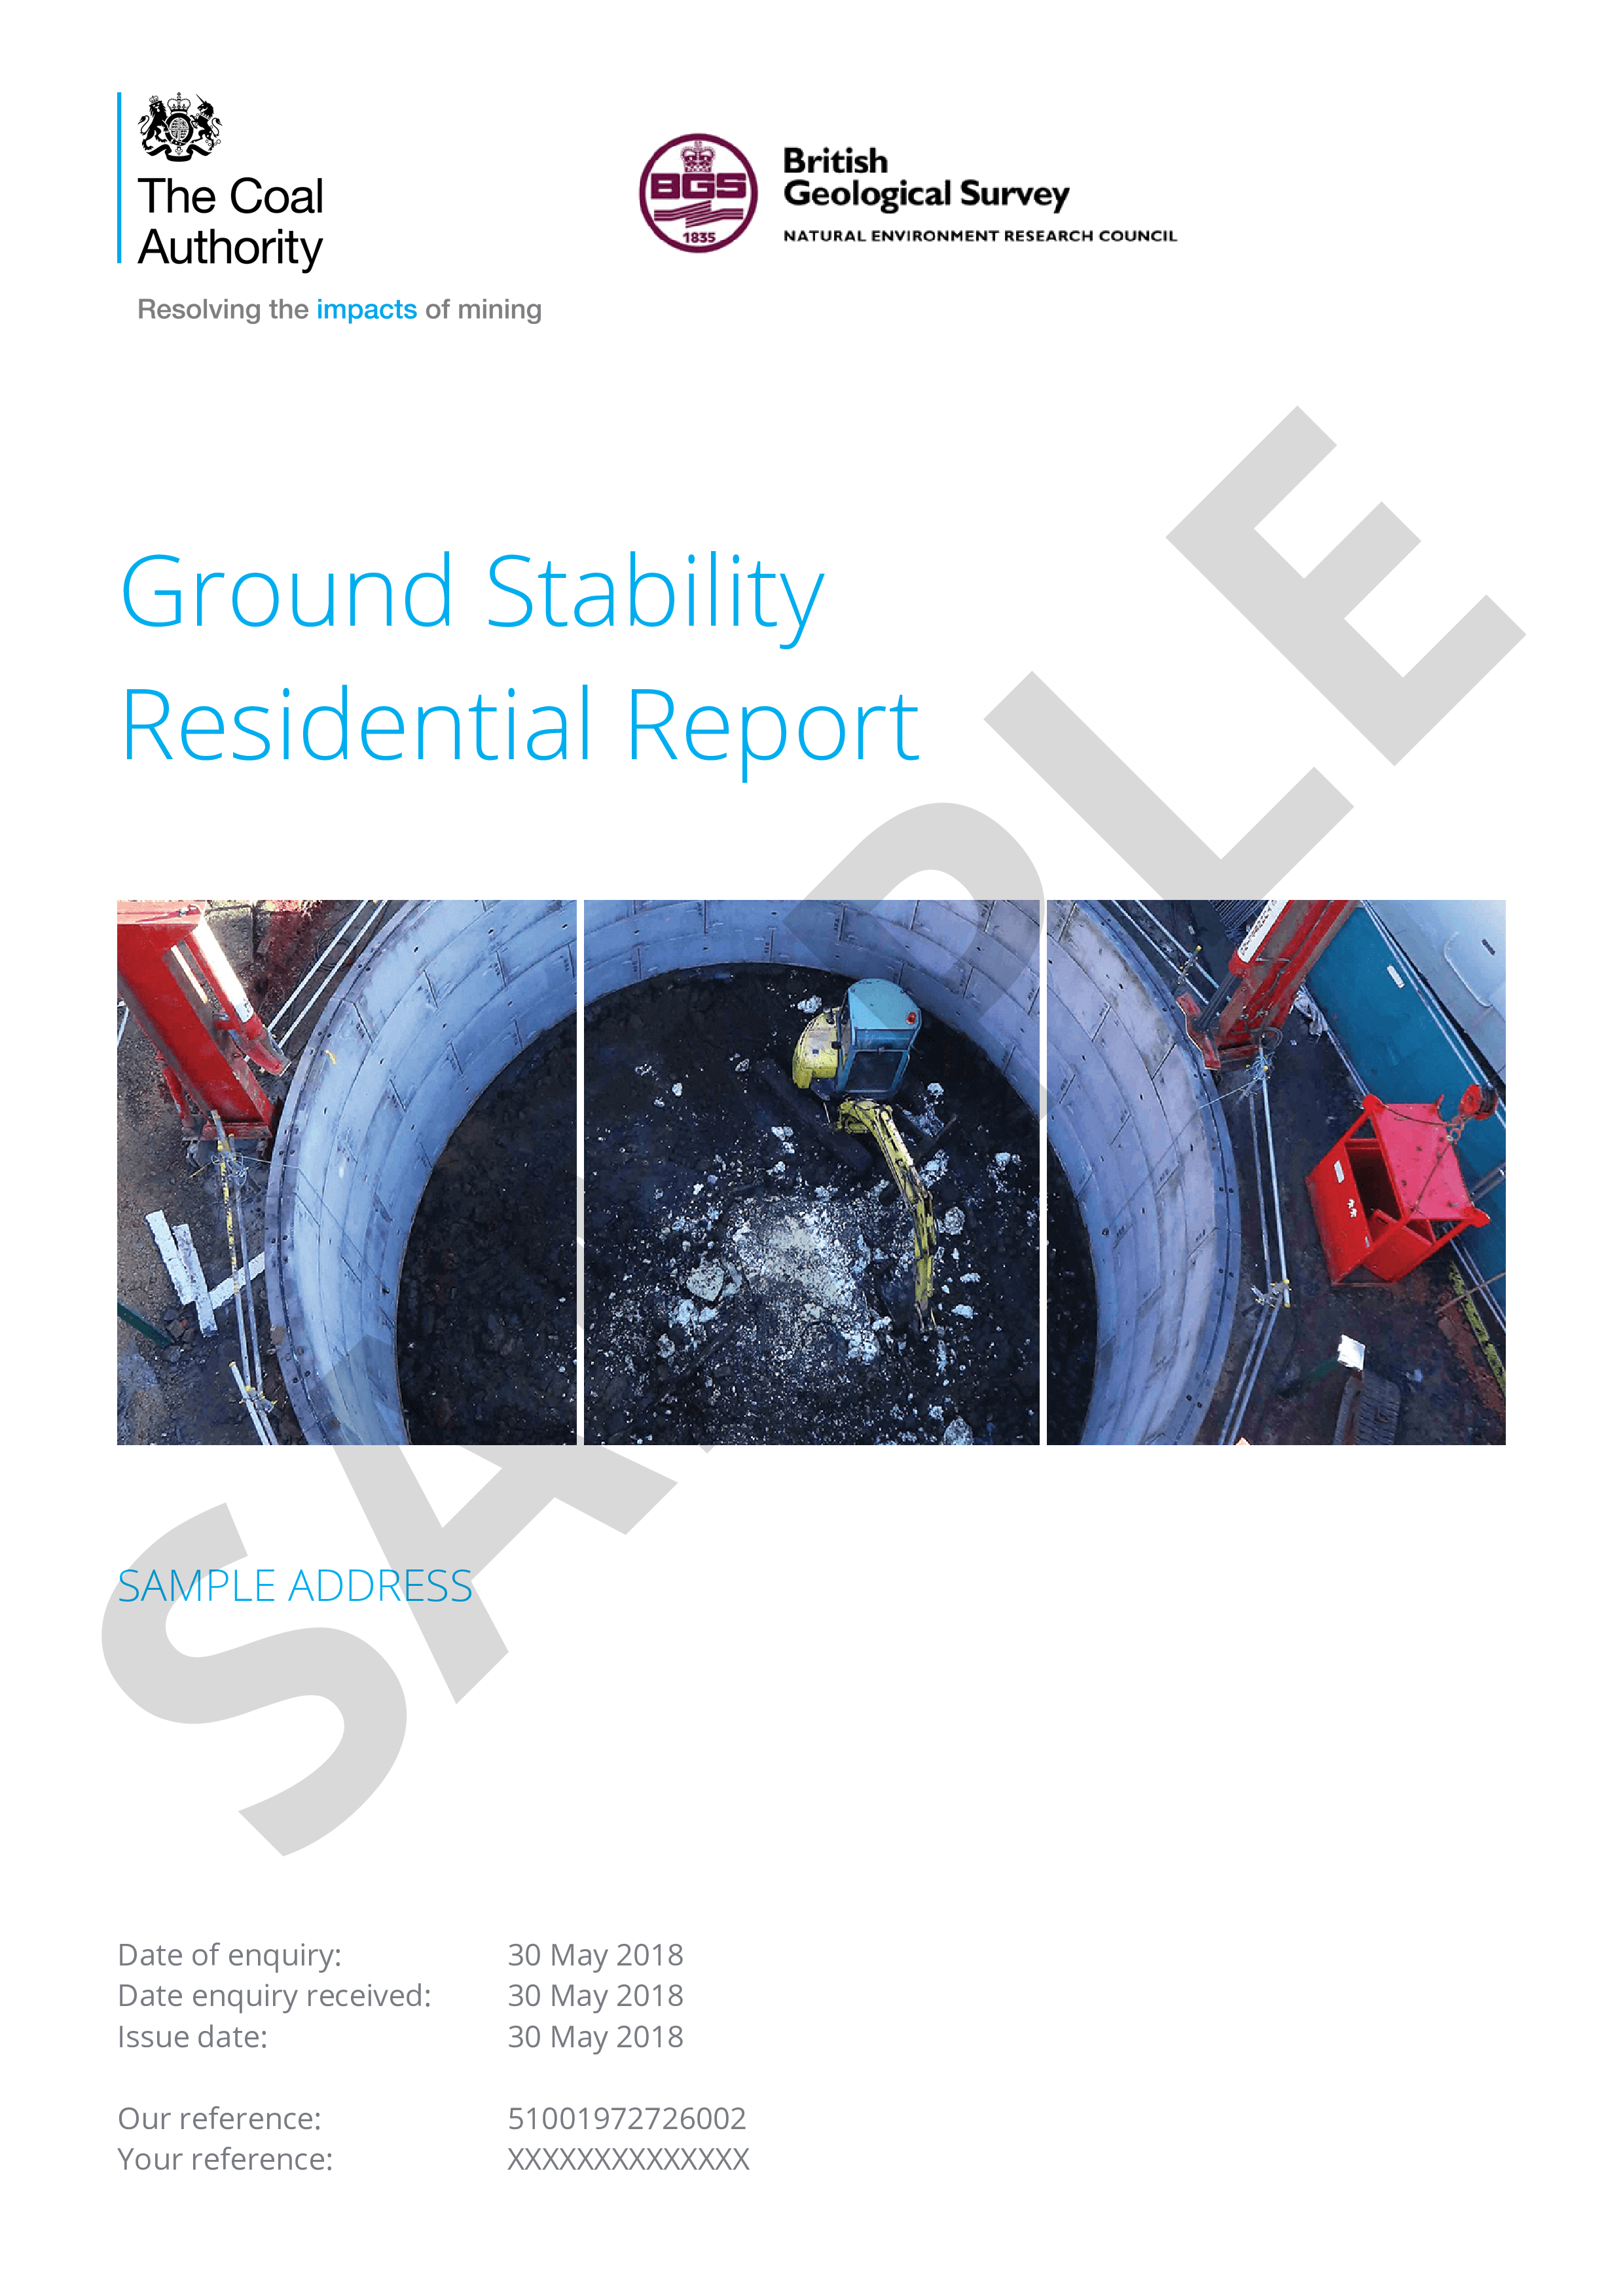 Coal Authority Ground Stability Report Image